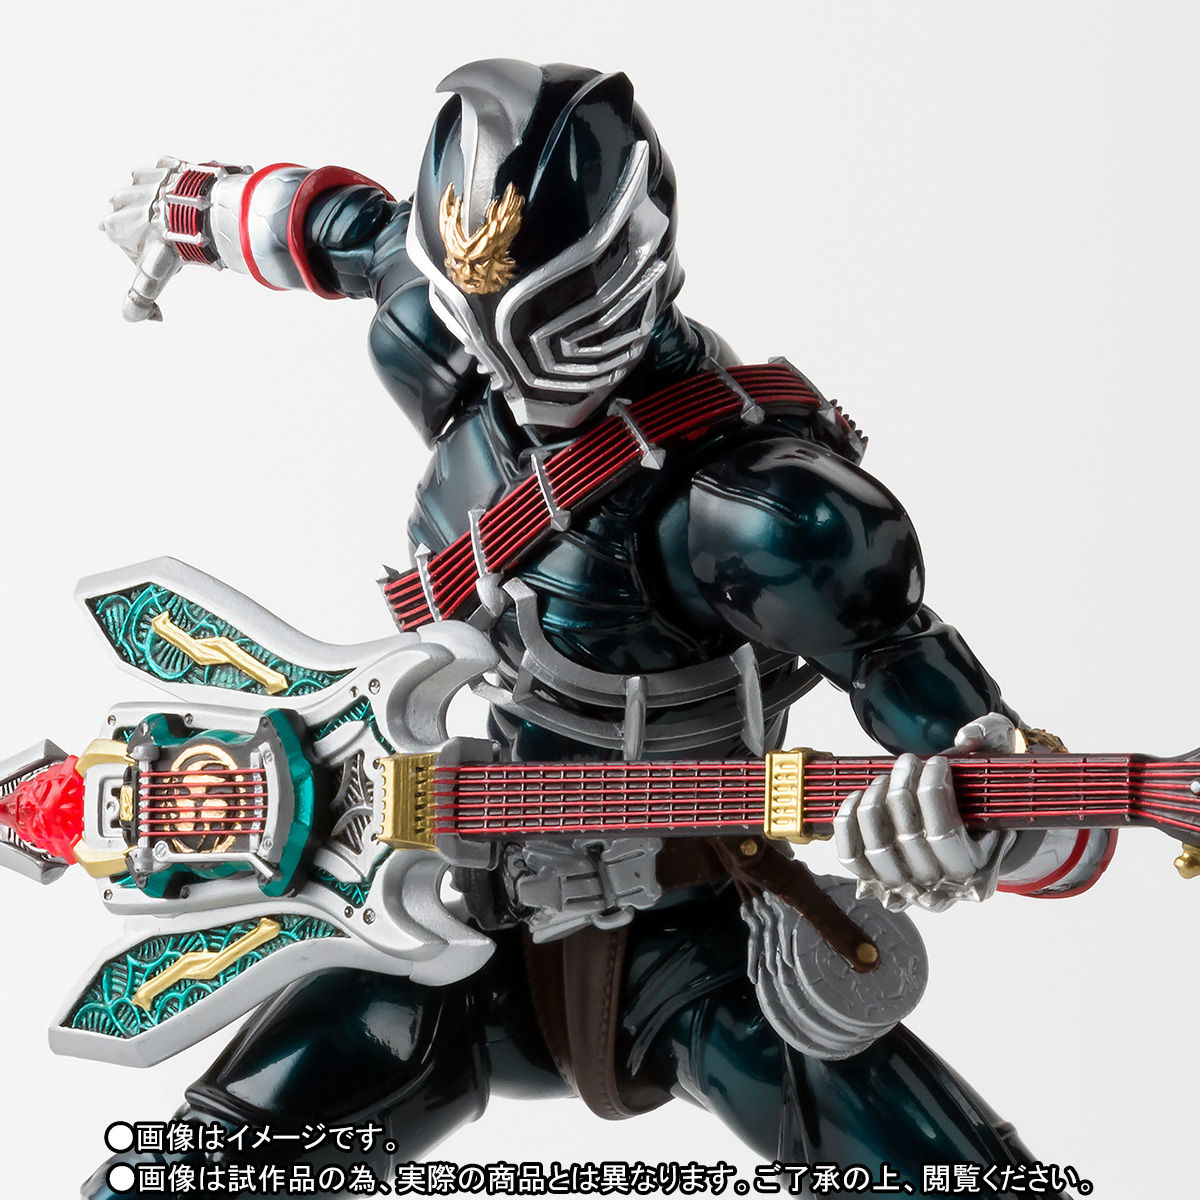 S.H.Figuarts(真骨彫製法) 仮面ライダー威吹鬼/轟鬼